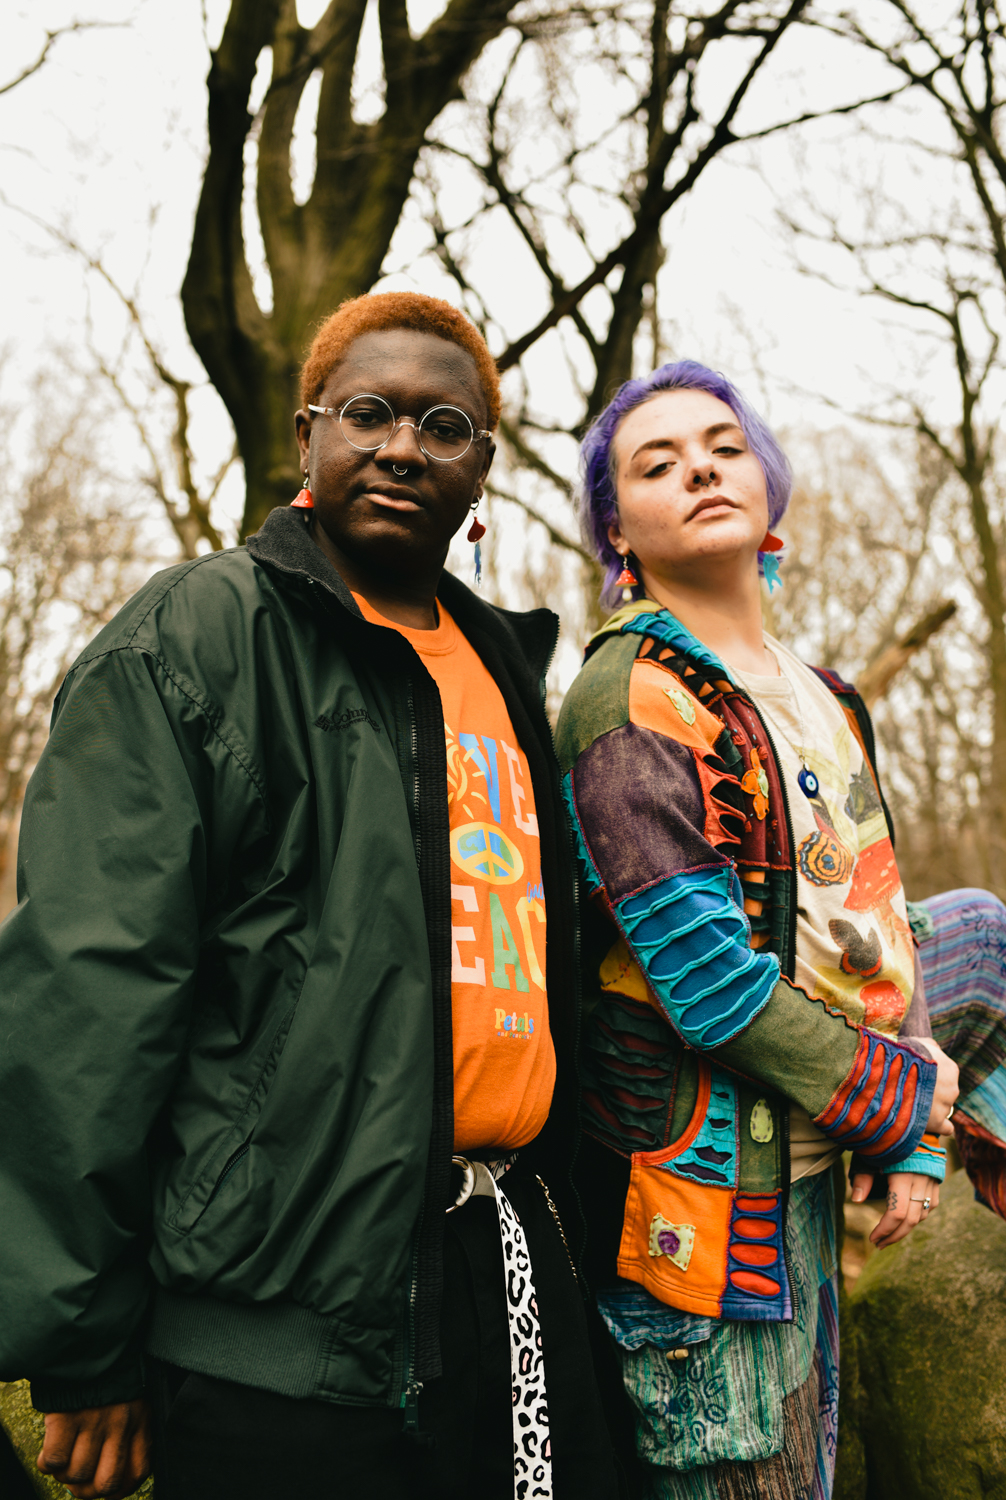 Dee Oglesby and Jinx Sage stand together in Prospect Park. They are looking down into the camera. Oglesby, who has orange hair, is wearing black pants, an orange t-shirt, and a green jacket, and has a nose ring. Sage, who has purple hair, is wearing a bright-colored patchwork jacket and patchwork pants.